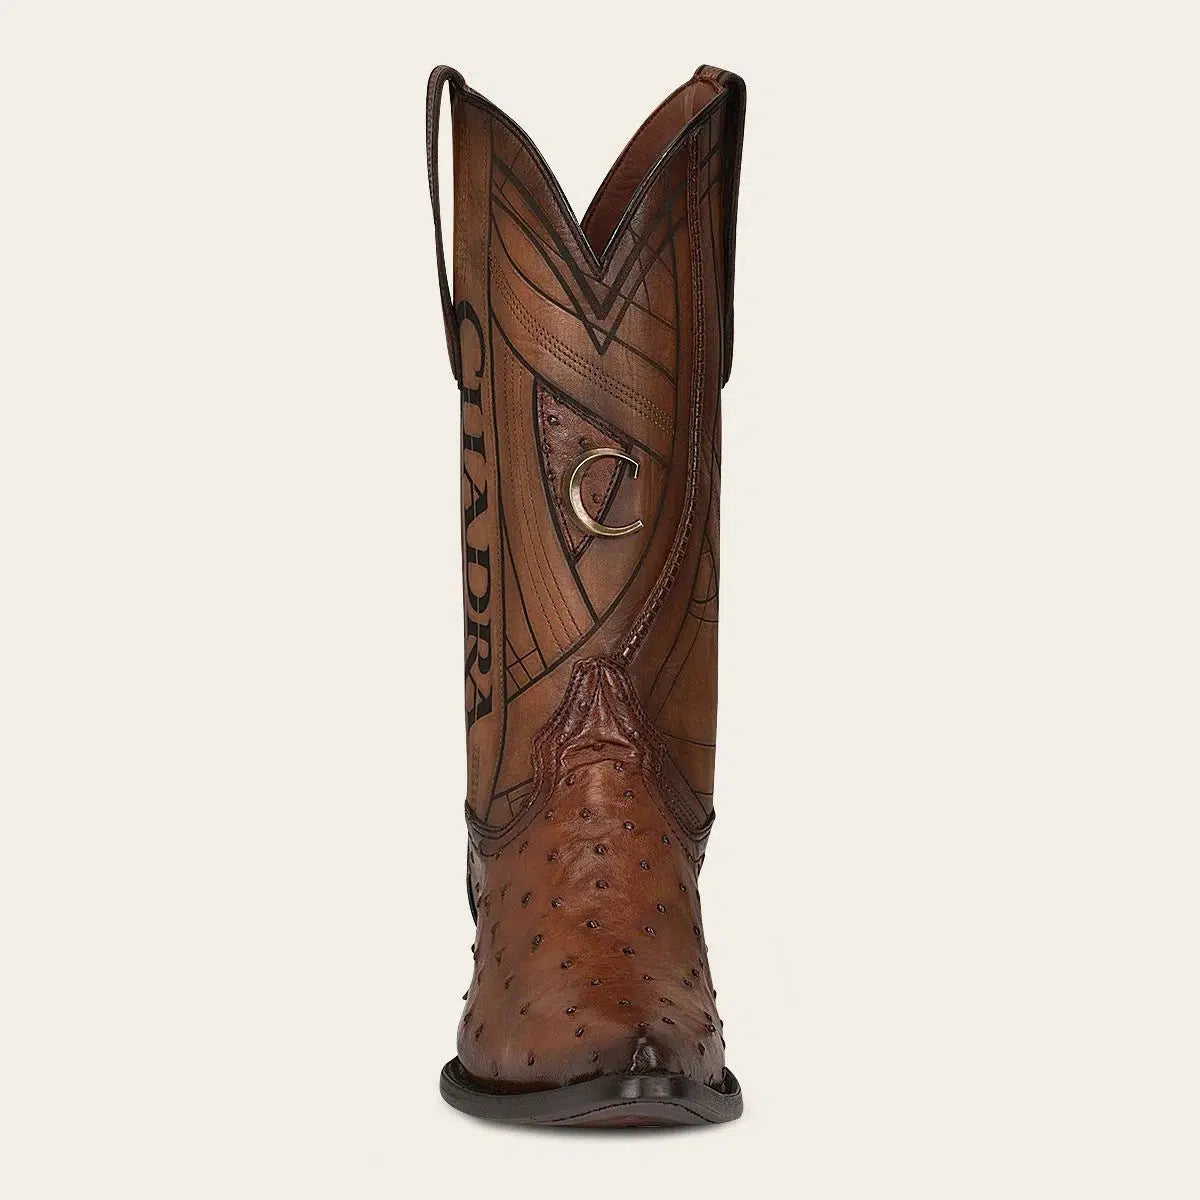 B22PA1 - Cuadra brown dress cowboy ostrich leather boots for men-Kuet.us